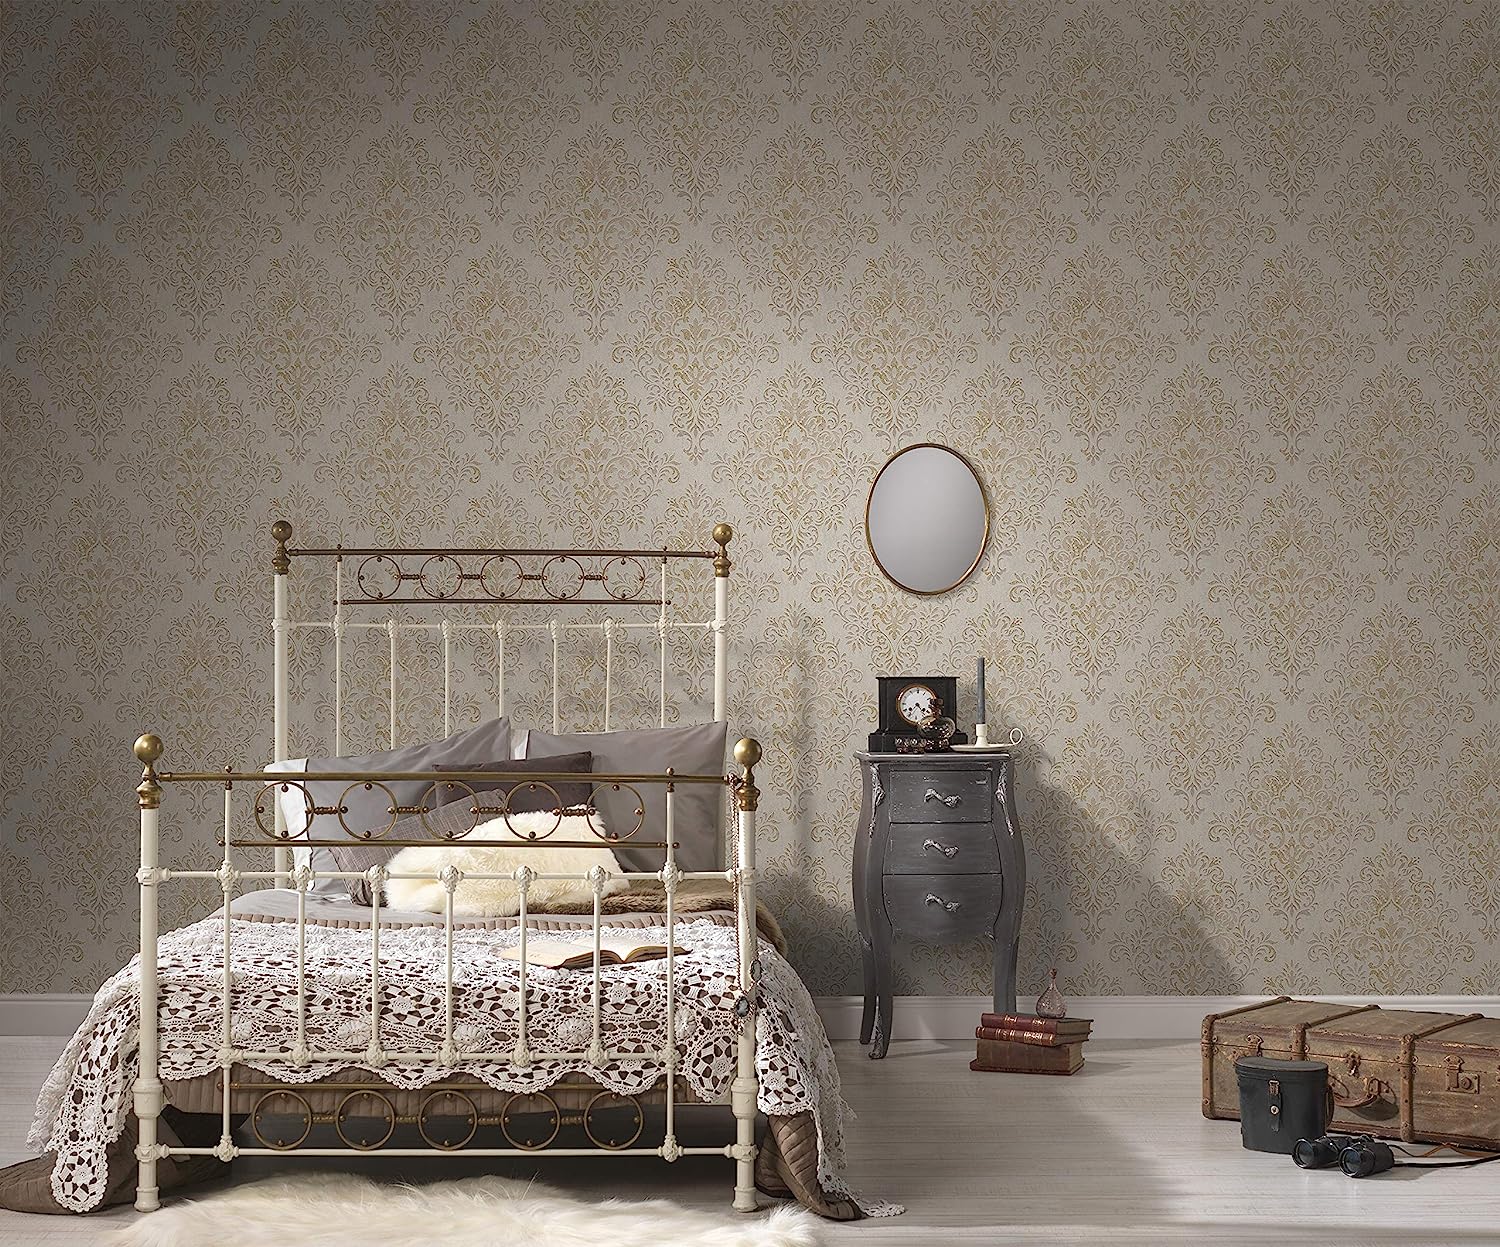 Livingwalls Jette Joop 339244 33924-4 Non-Woven Wallpaper with Ornaments Baroque 10.05 m x 0.53 m Beige Brown Metallic Made in Germany